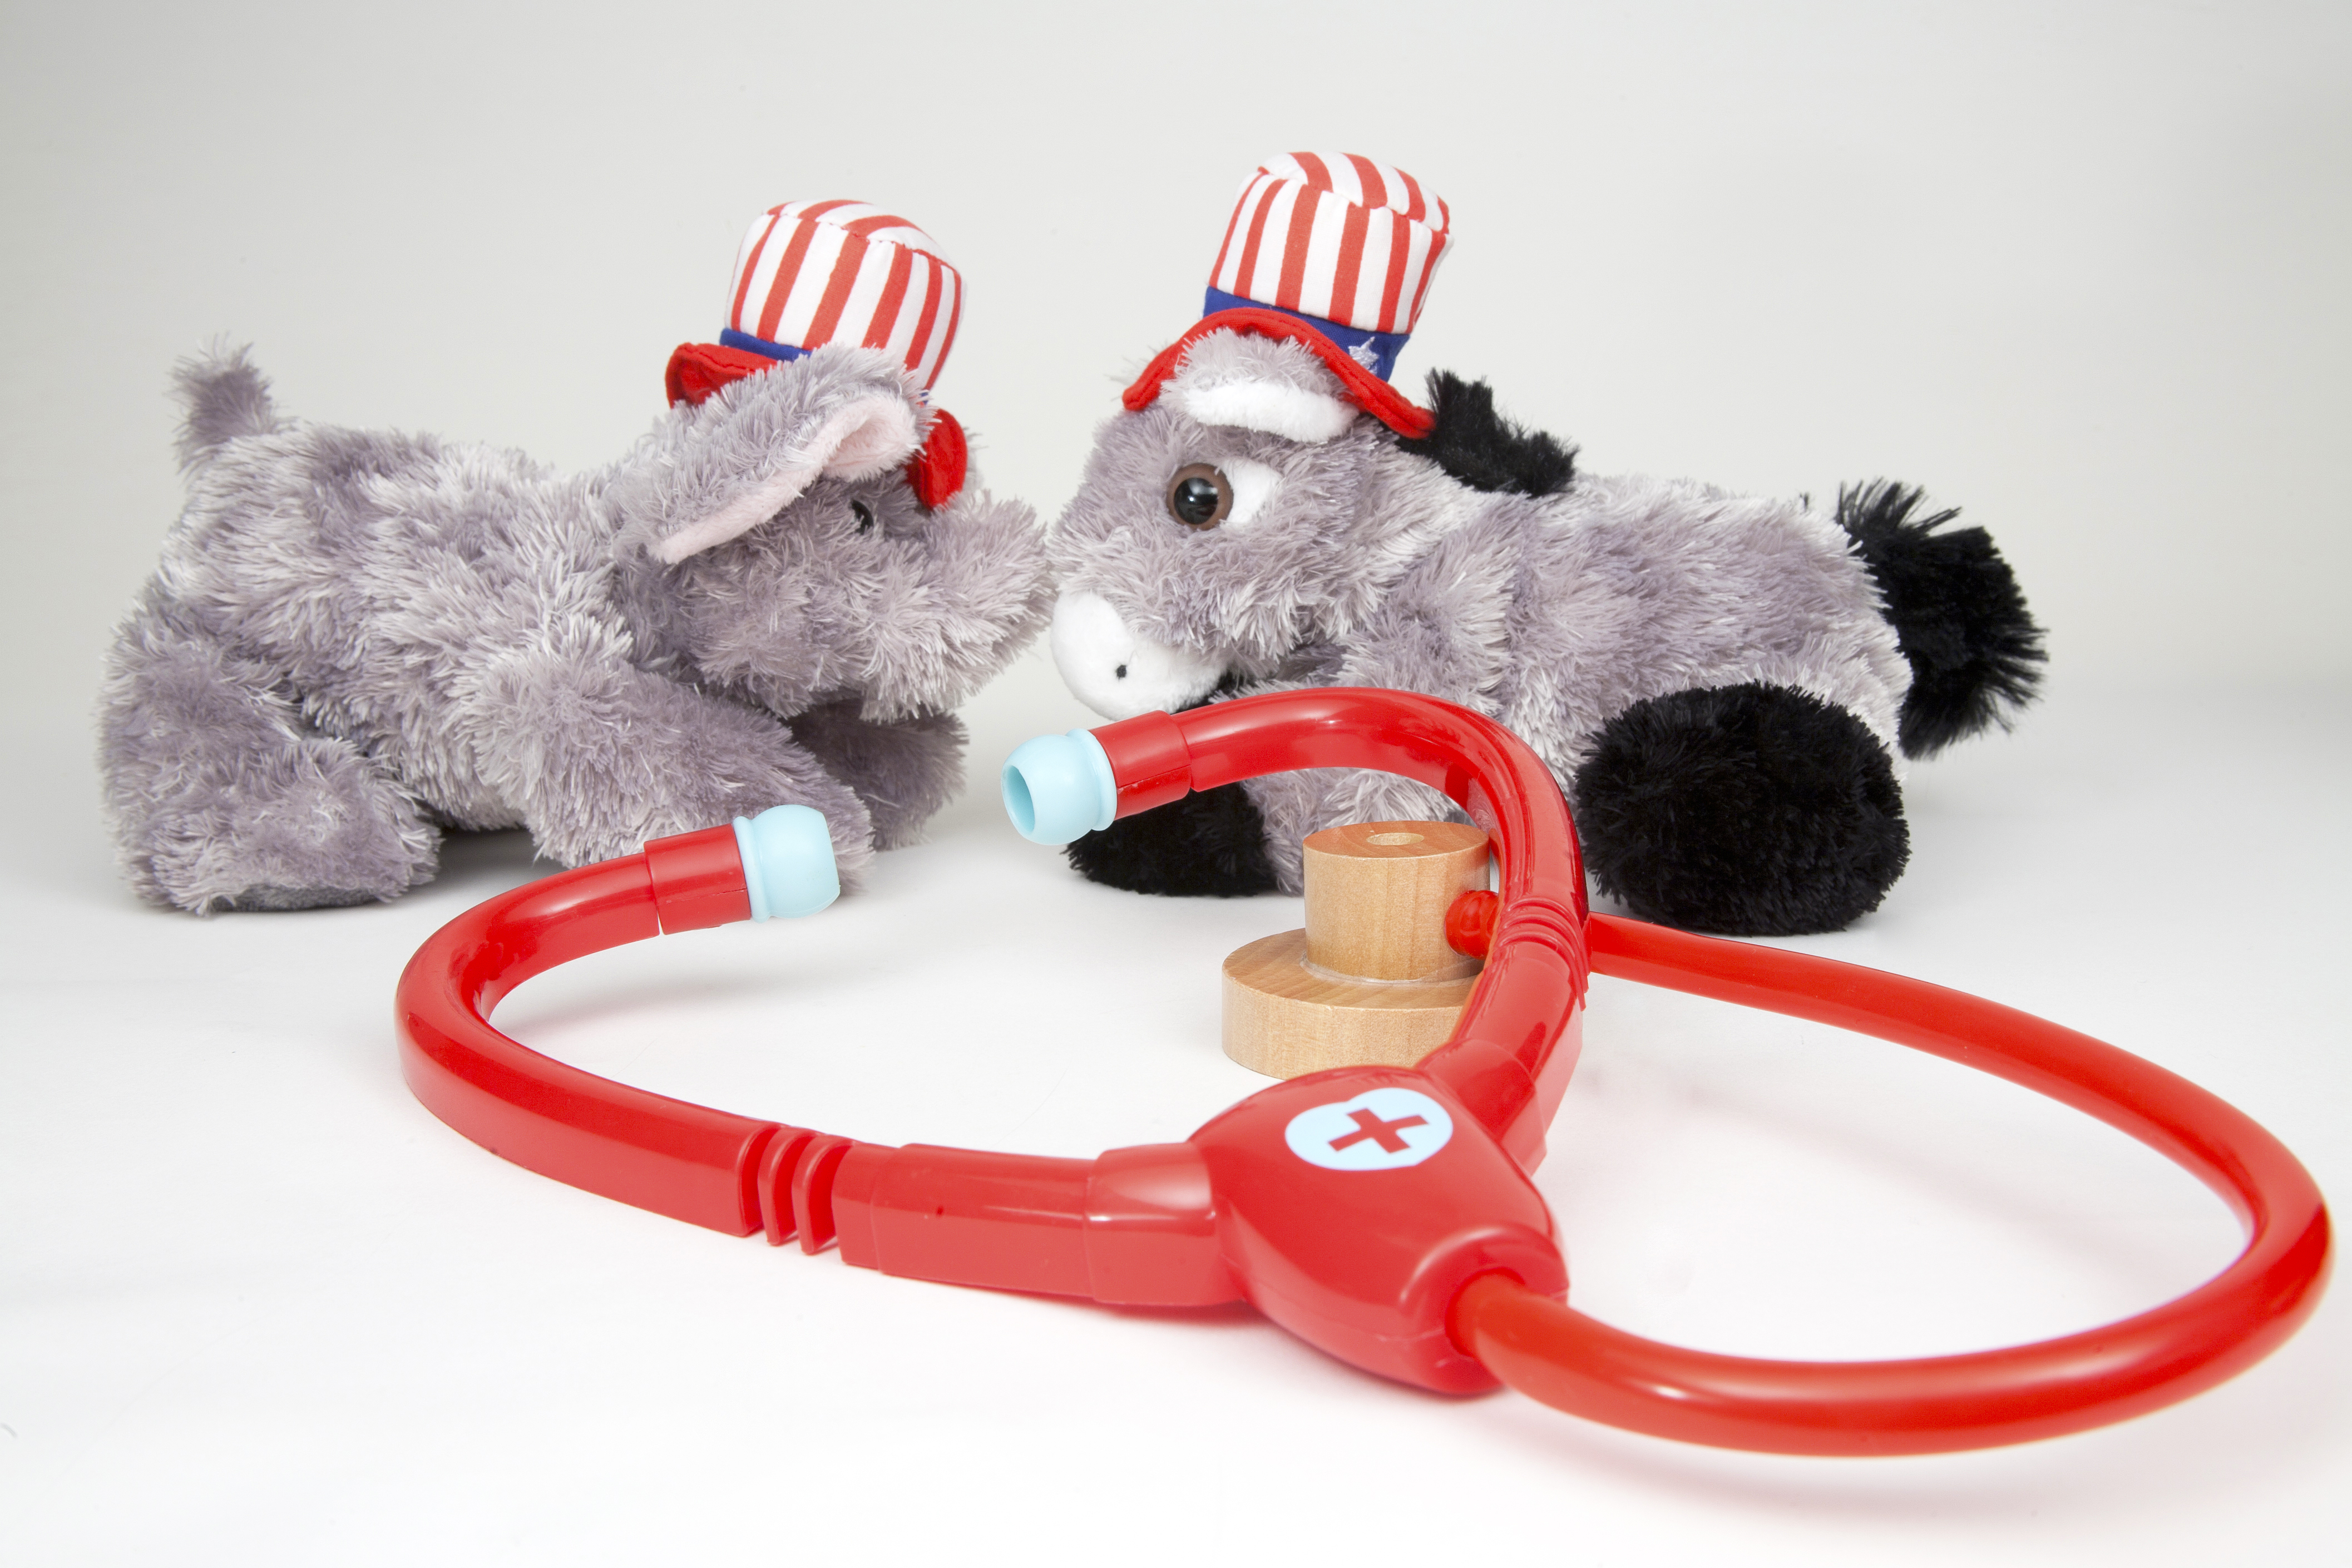 Stuffed elephant representing the Republican Party and stuffed donkey representing the Democratic Party in red white and blu